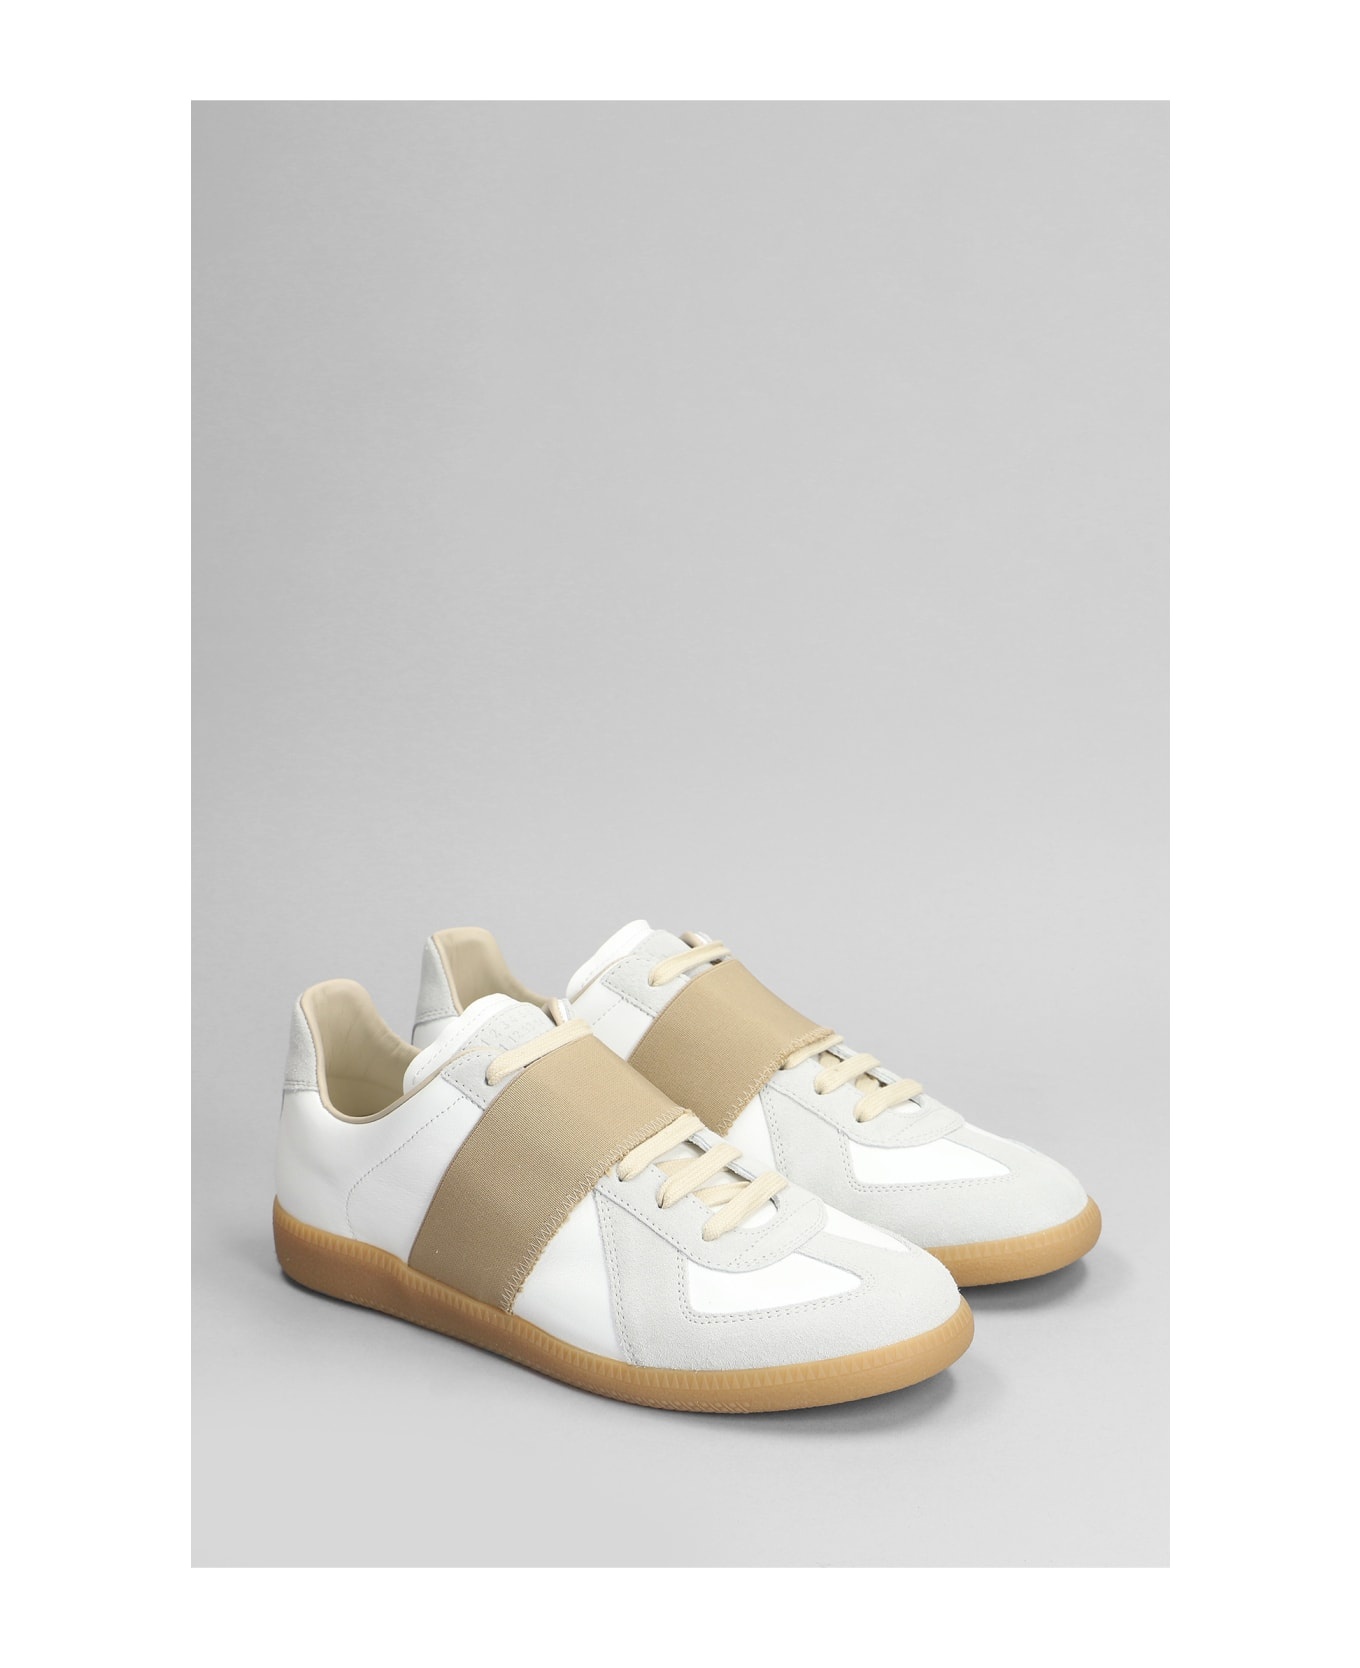 Replica Sneakers In White Suede And Leather - 2